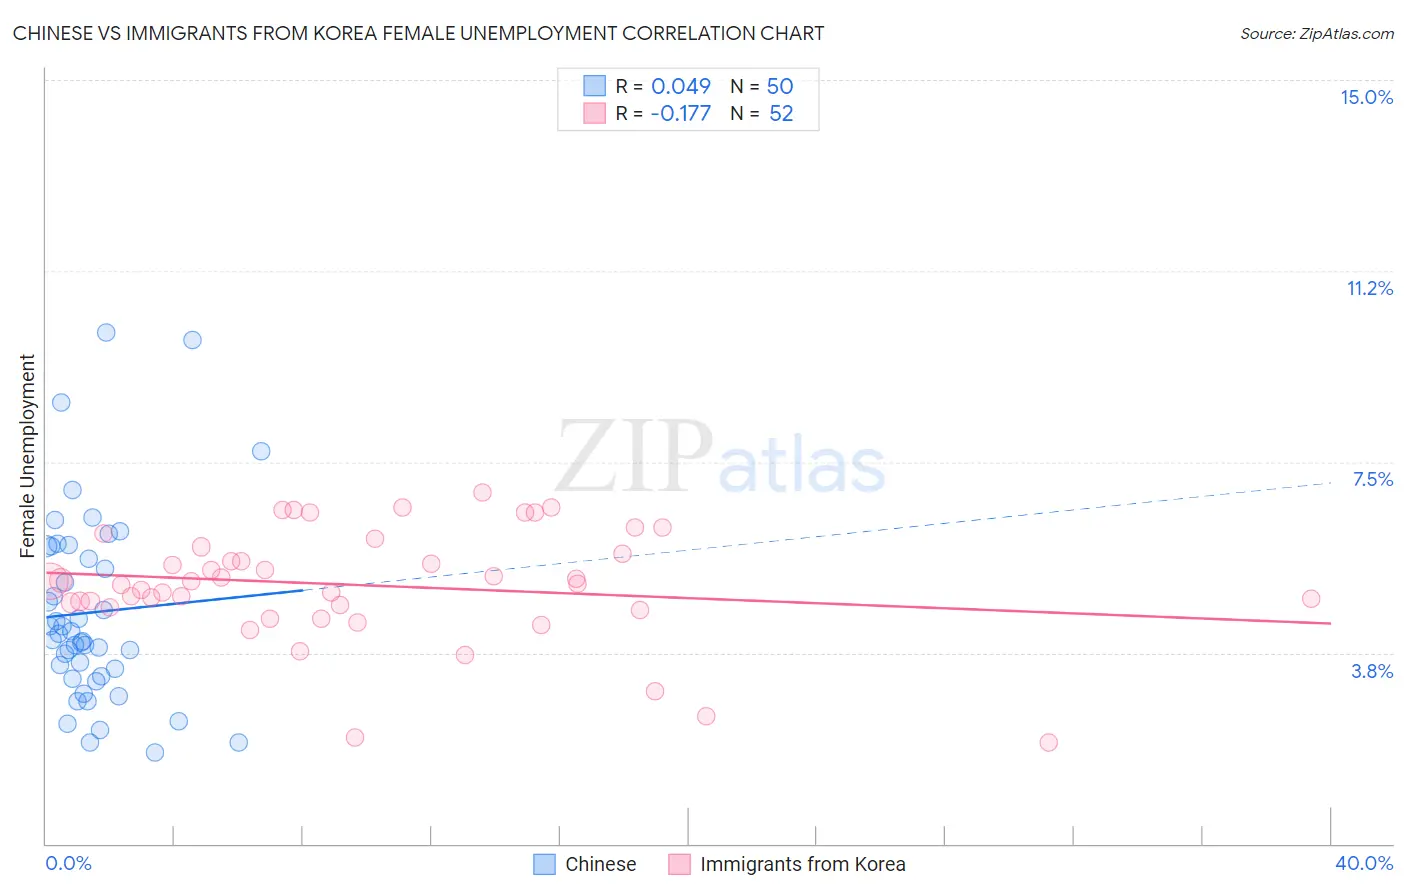 Chinese vs Immigrants from Korea Female Unemployment